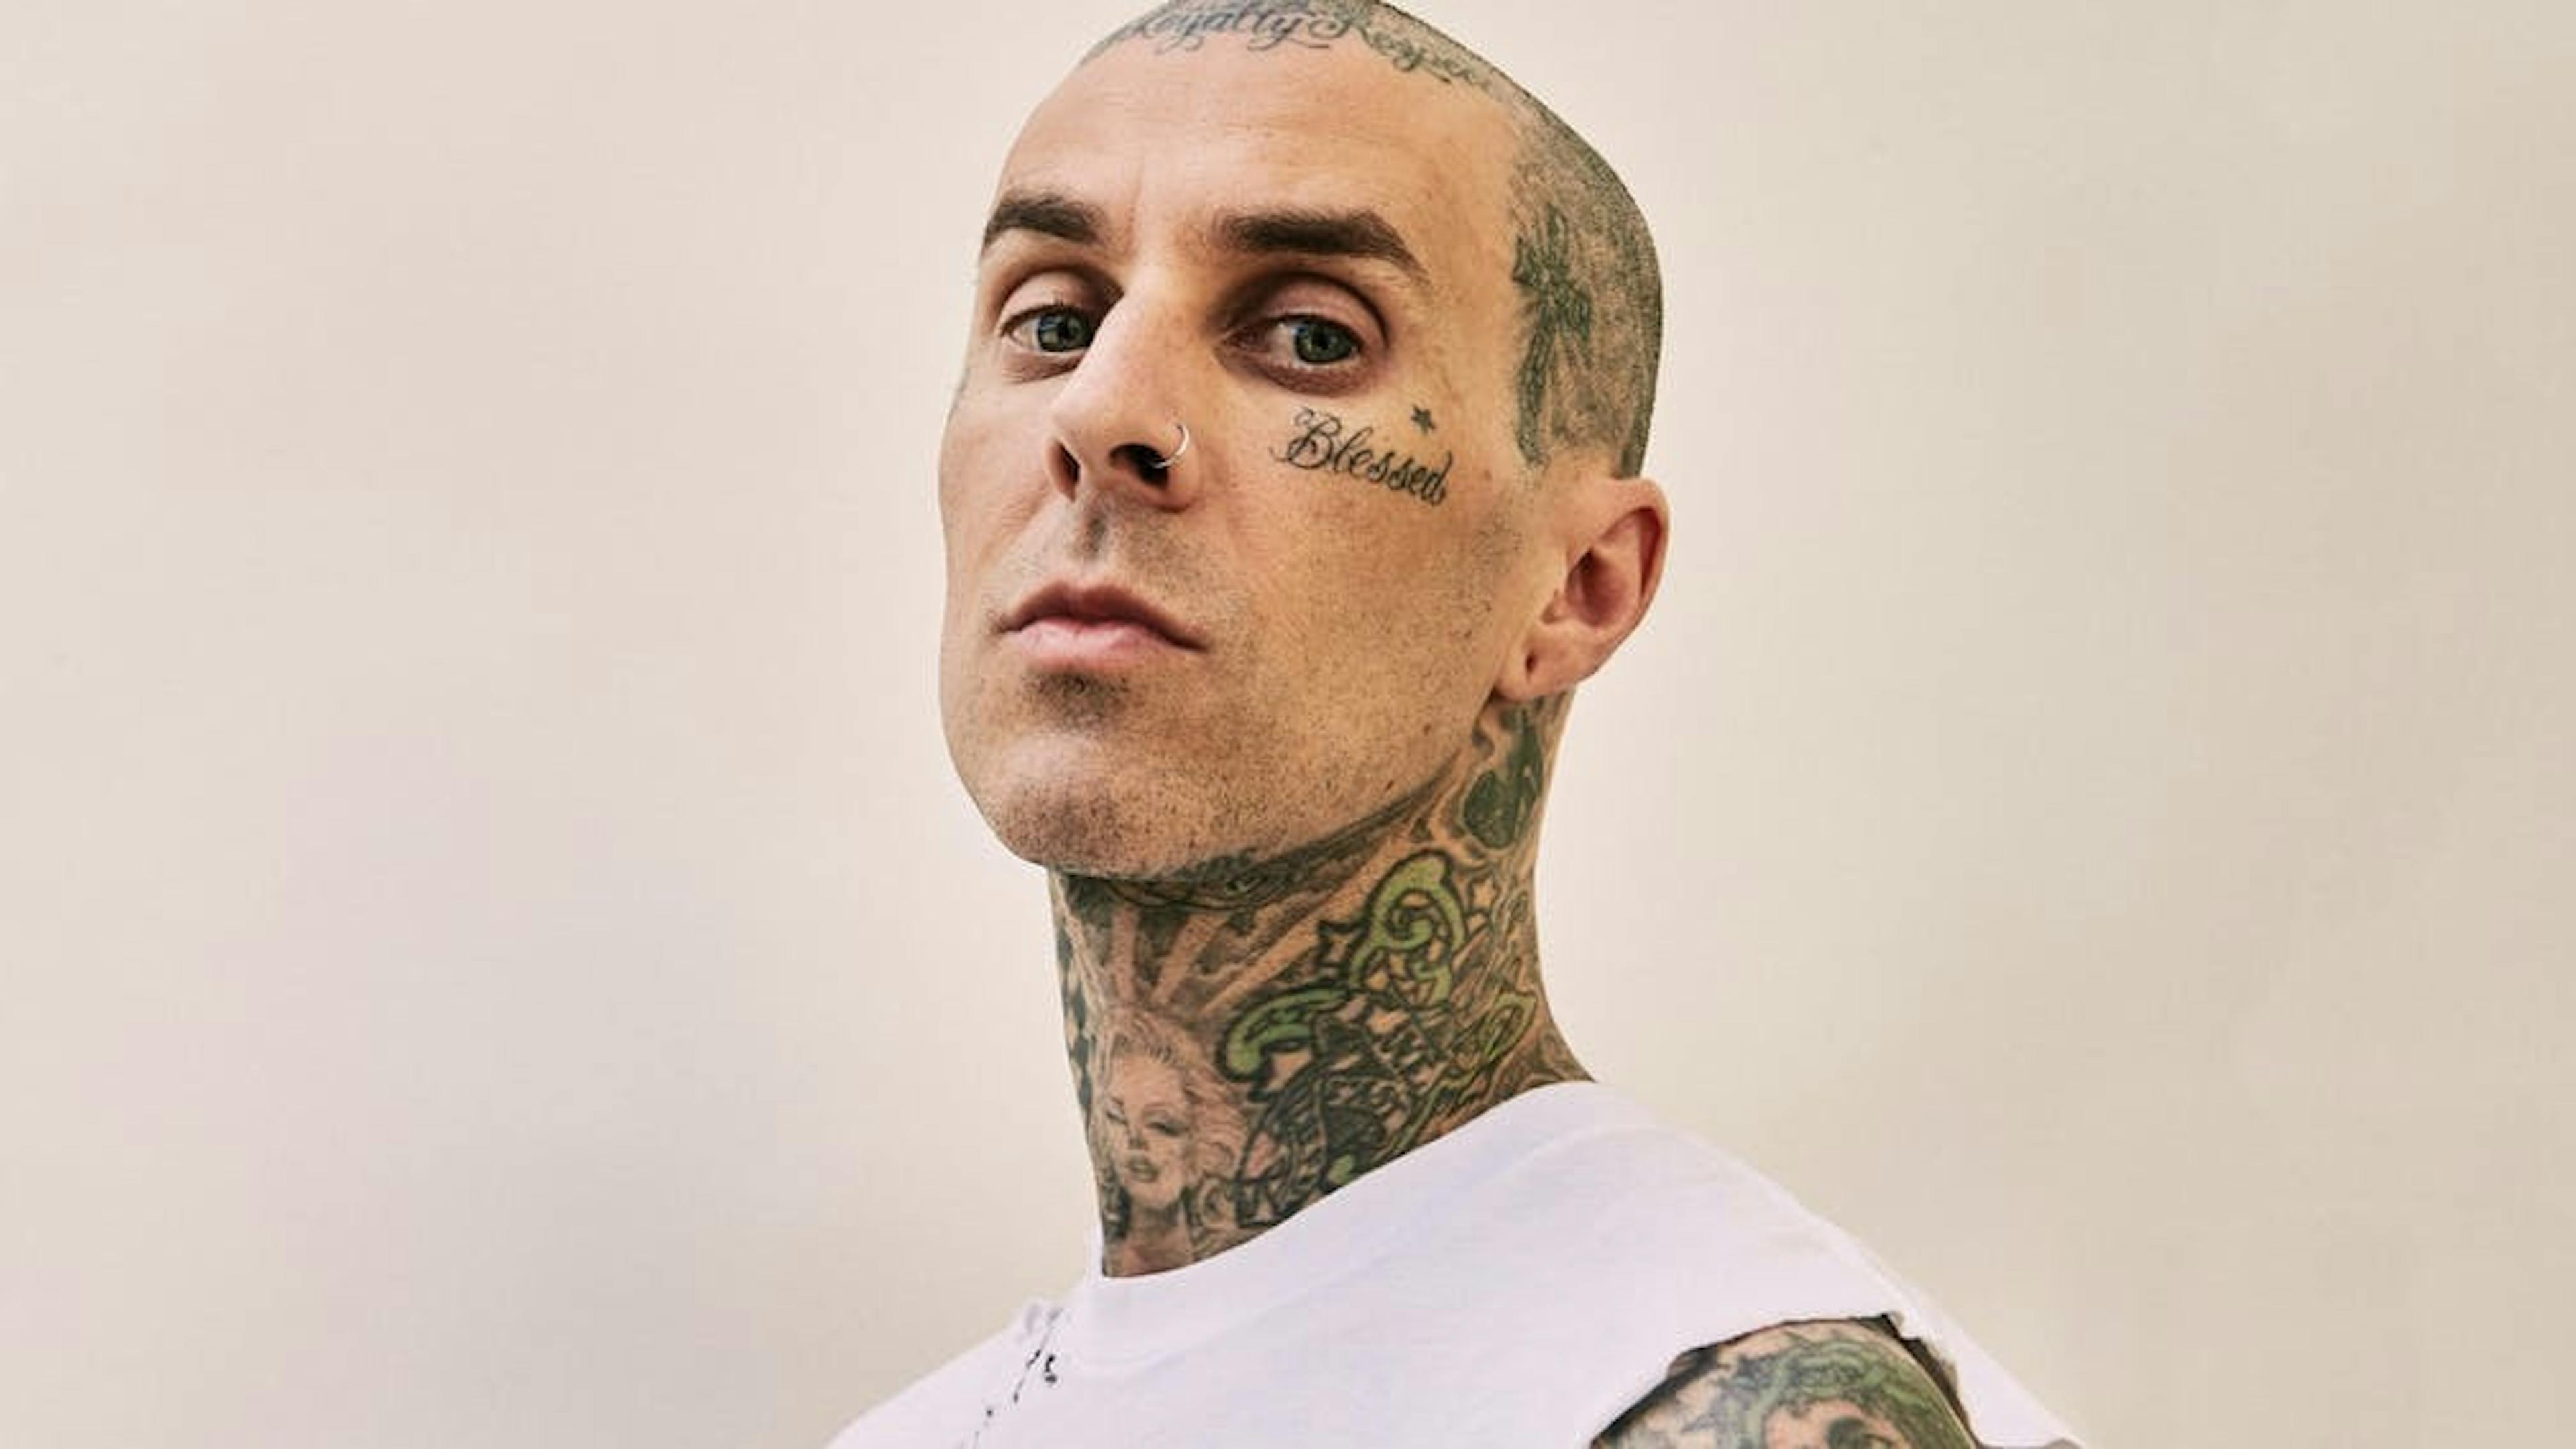 Travis Barker posts update following successful finger surgery: “I can keep doing what I love”